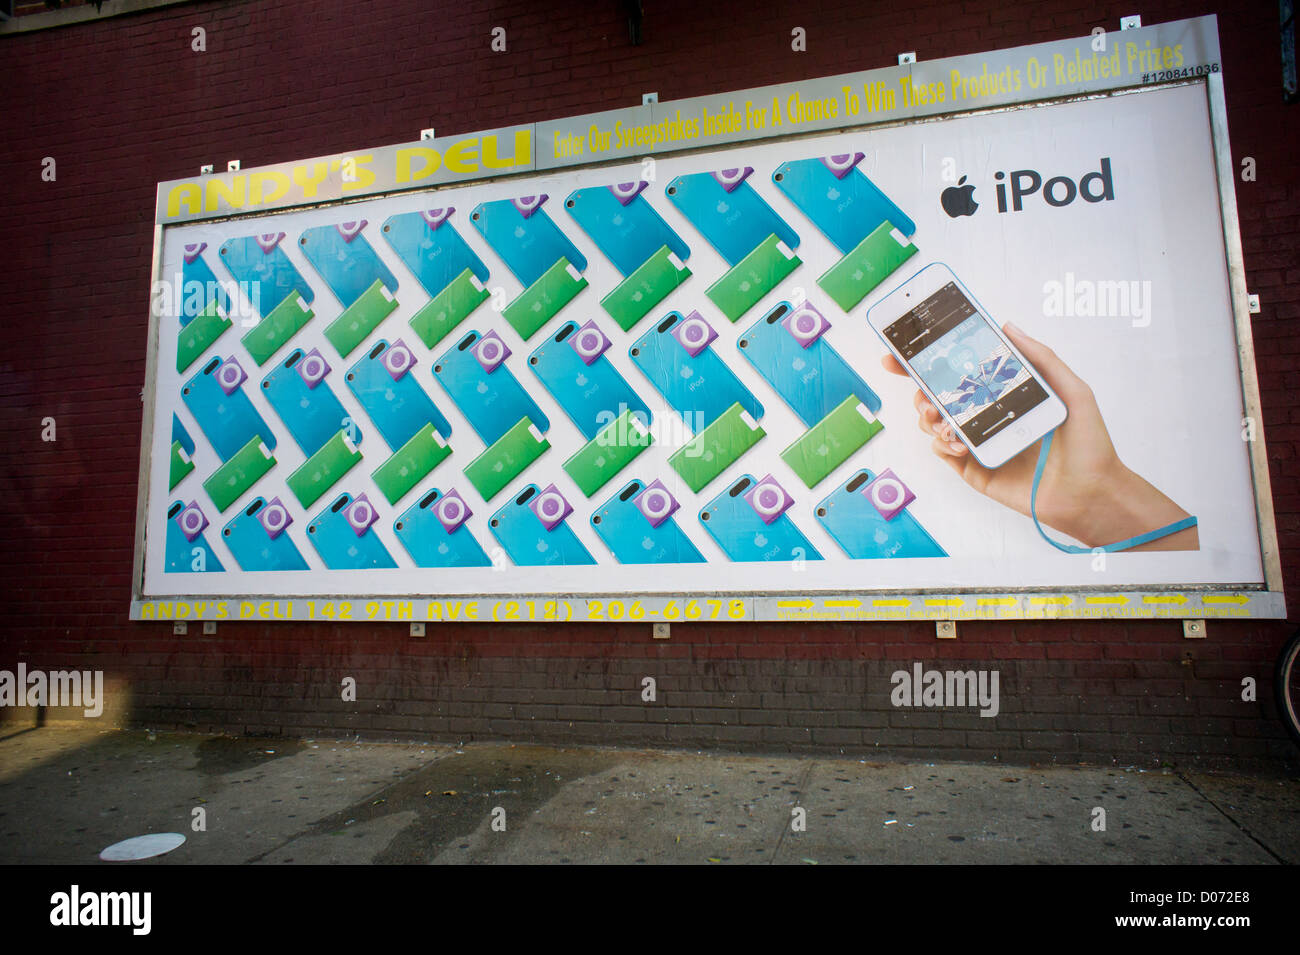 Advertising for the Apple's line of iPods on a billboard in the Chelsea neighborhood of New York Stock Photo